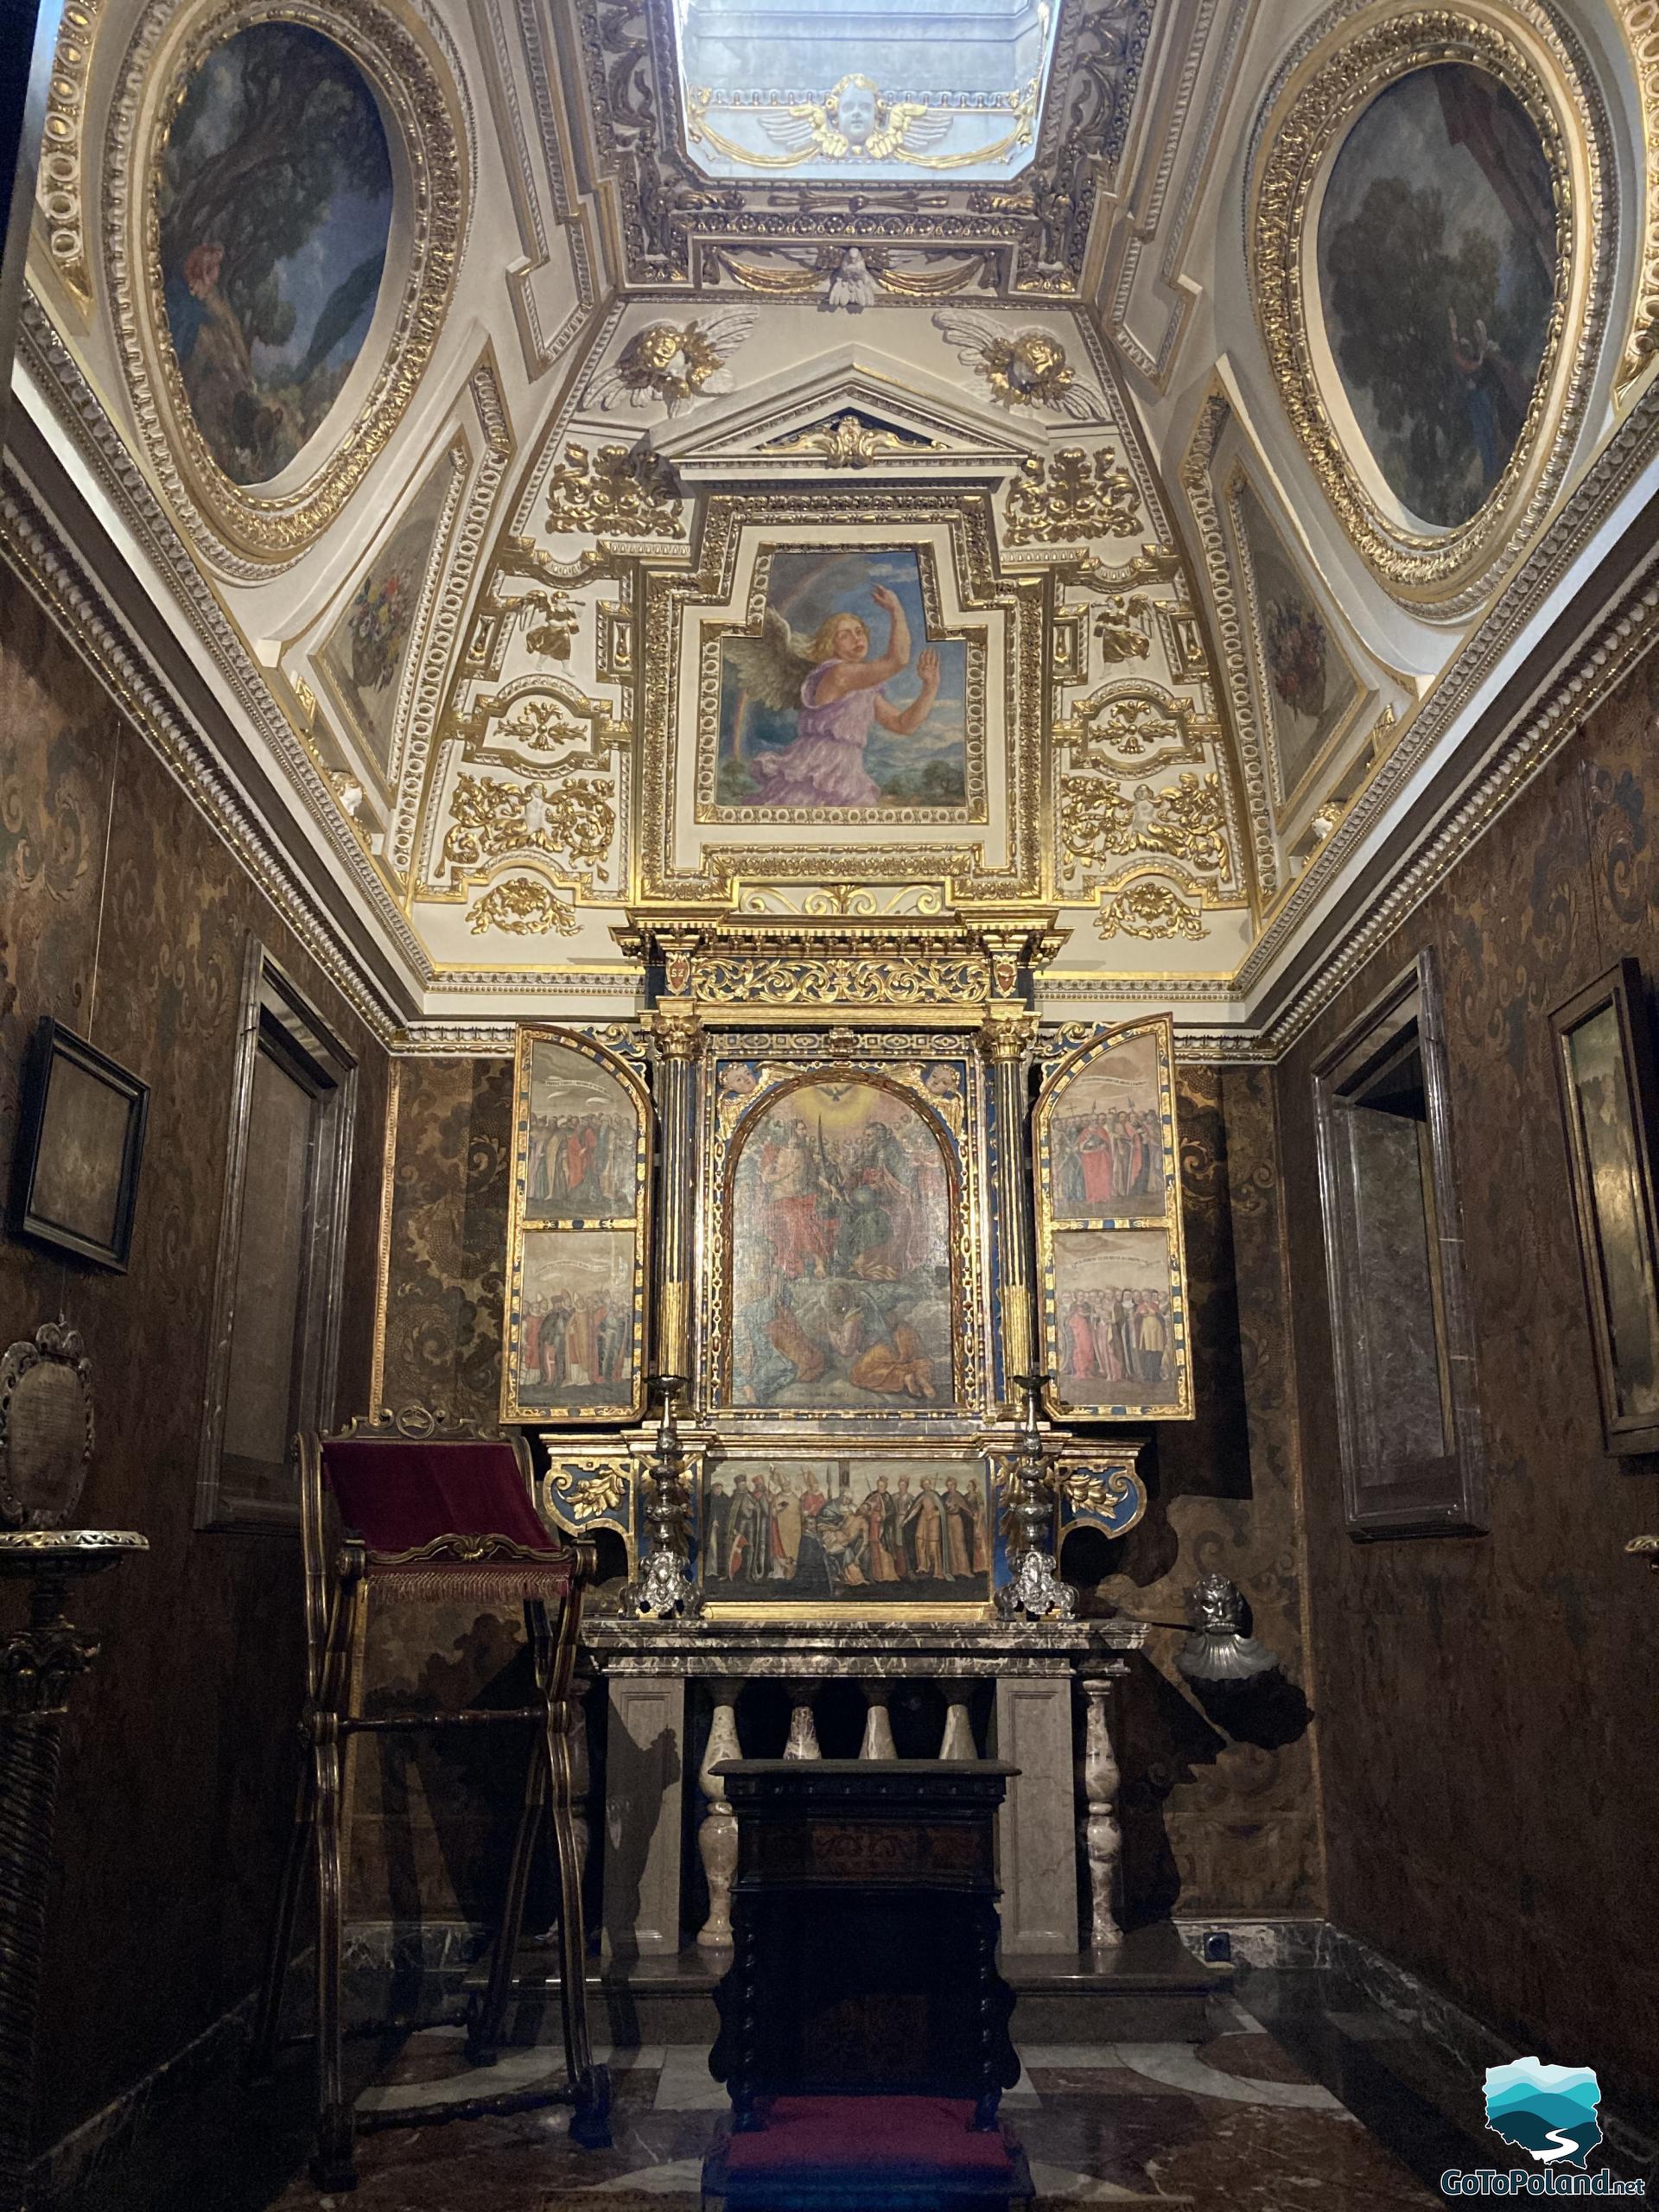 a chapel in the castle, with gold decorations and small altar